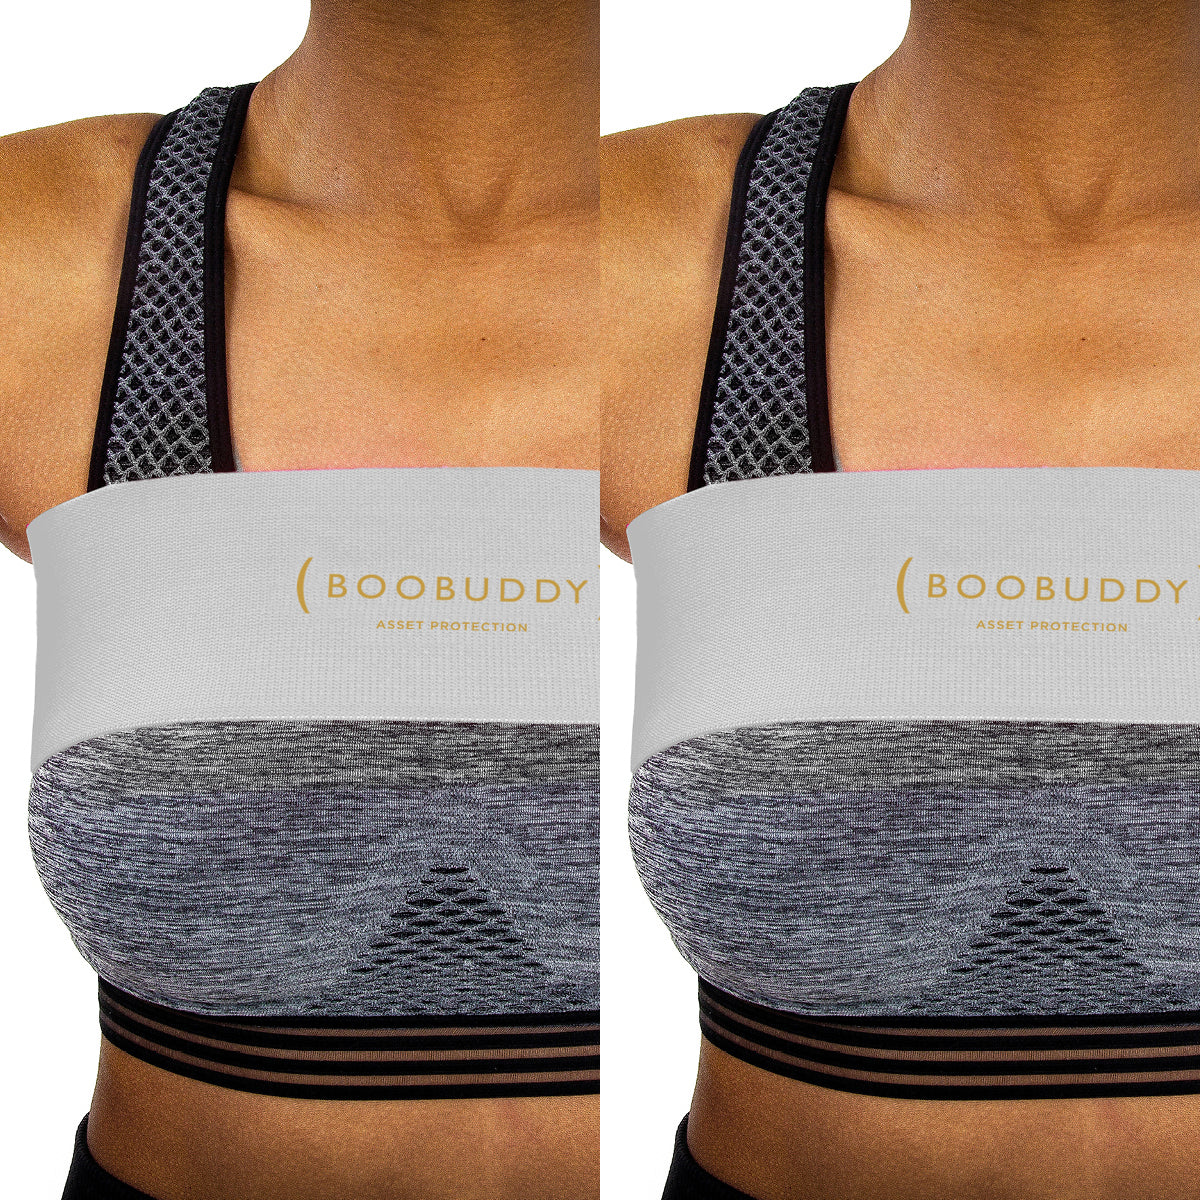 Boobuddy Adjustable Breast Support Band | Grey Twin Pack | How to Wear a Boobuddy